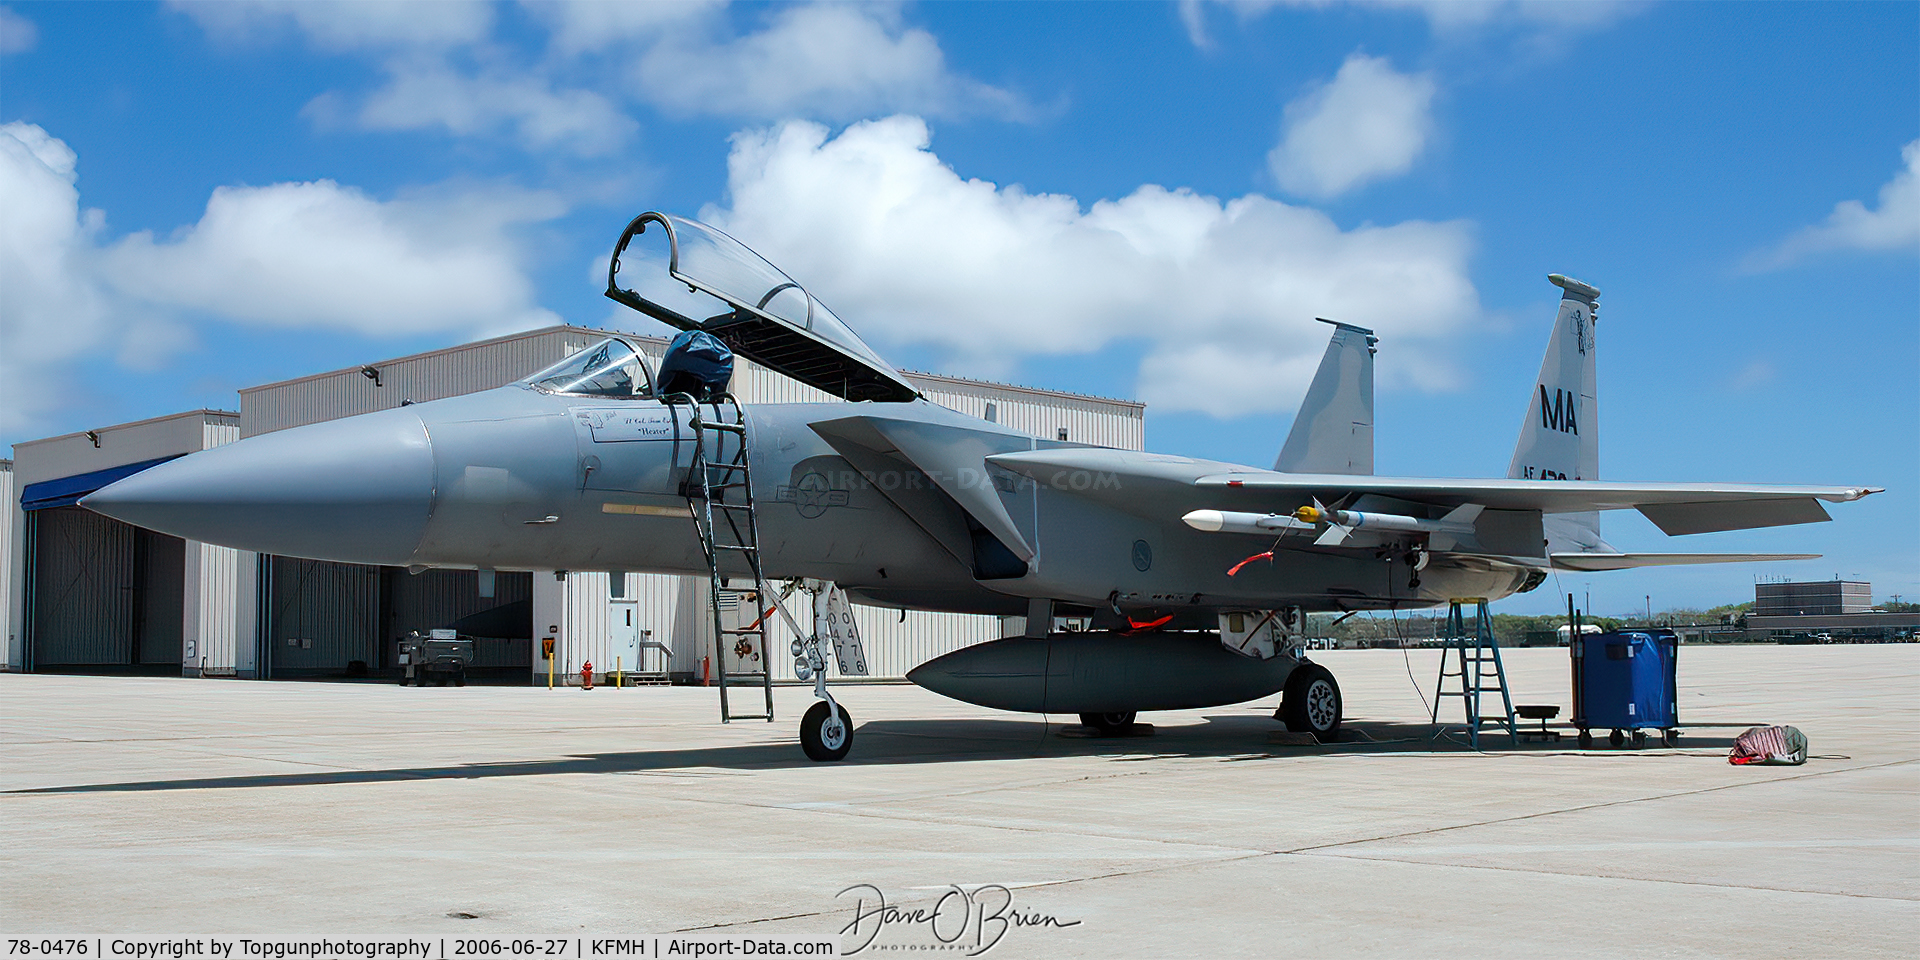 78-0476, McDonnell Douglas F-15C Eagle C/N 0455/C009, Crew Cheifs prepping for morning sortie